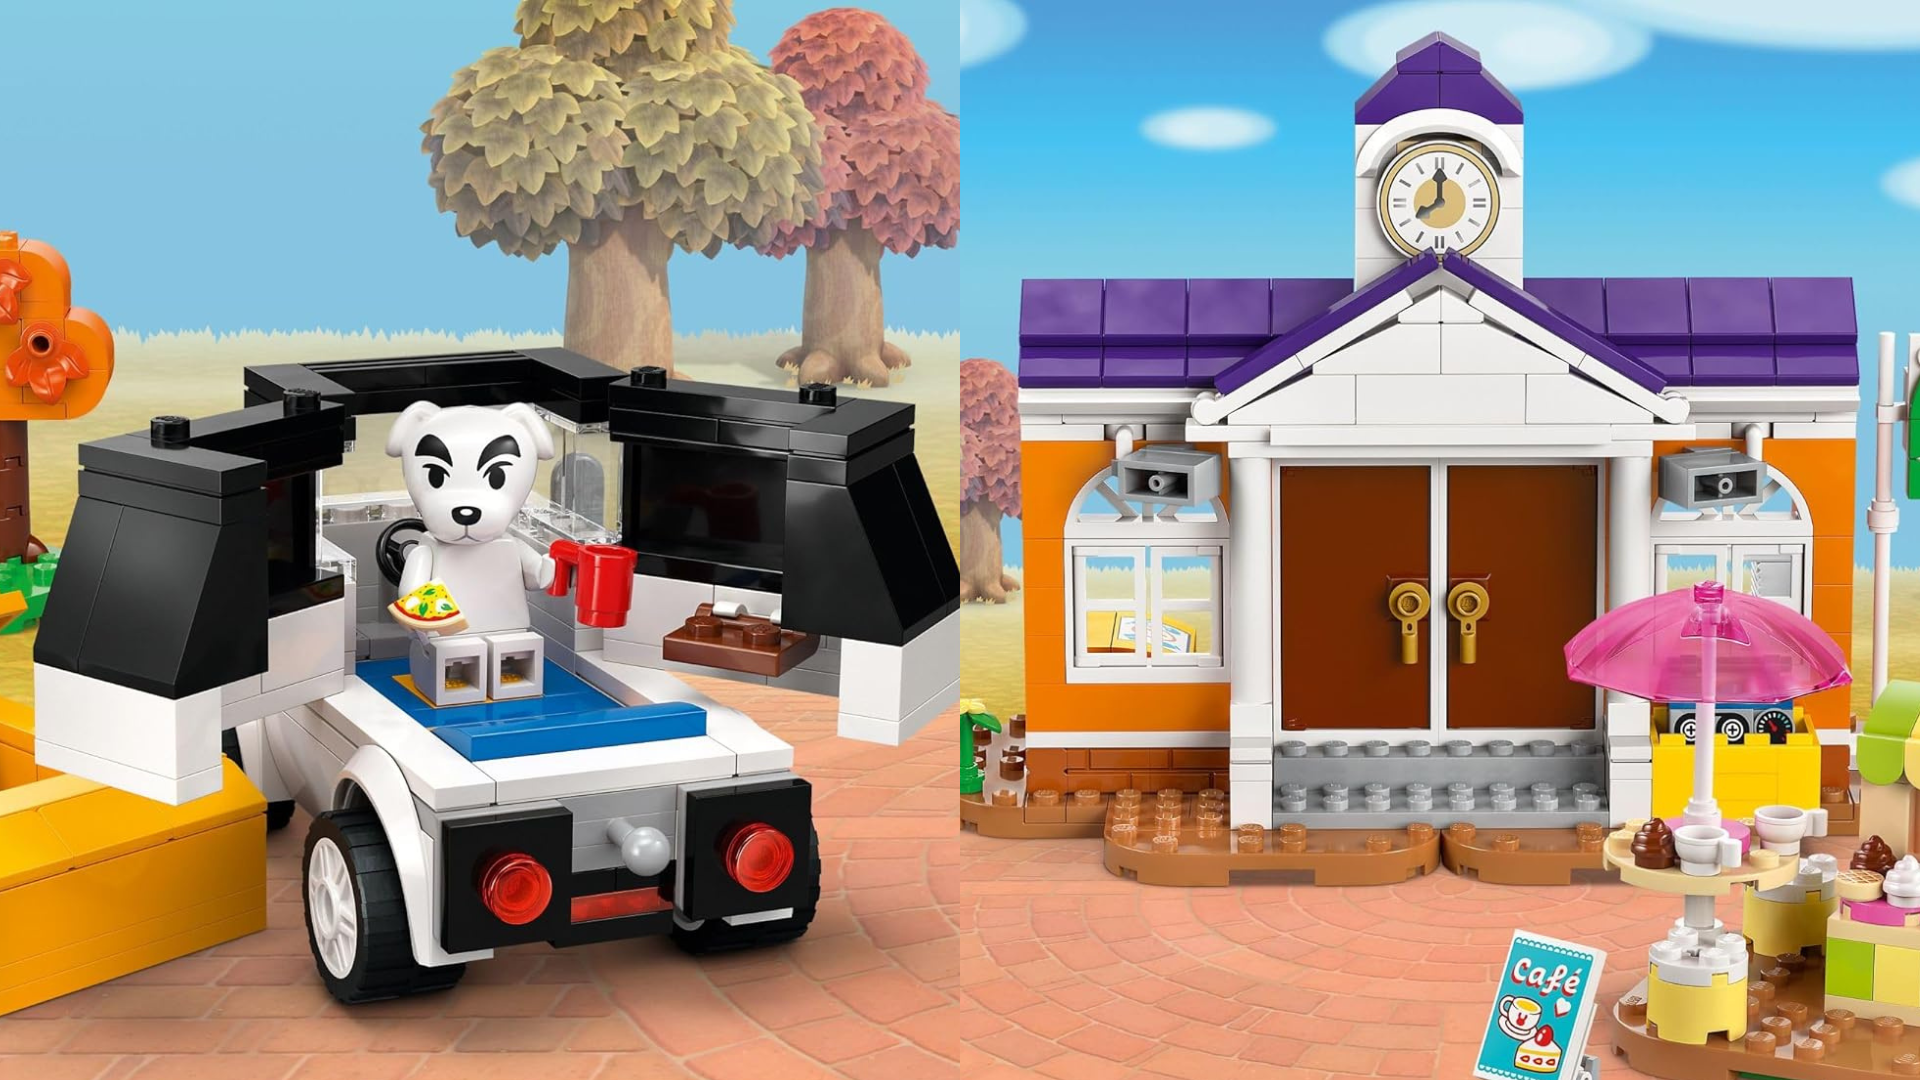 Lego just debuted new Animal Crossing and Super Mario sets — shop before they're gone